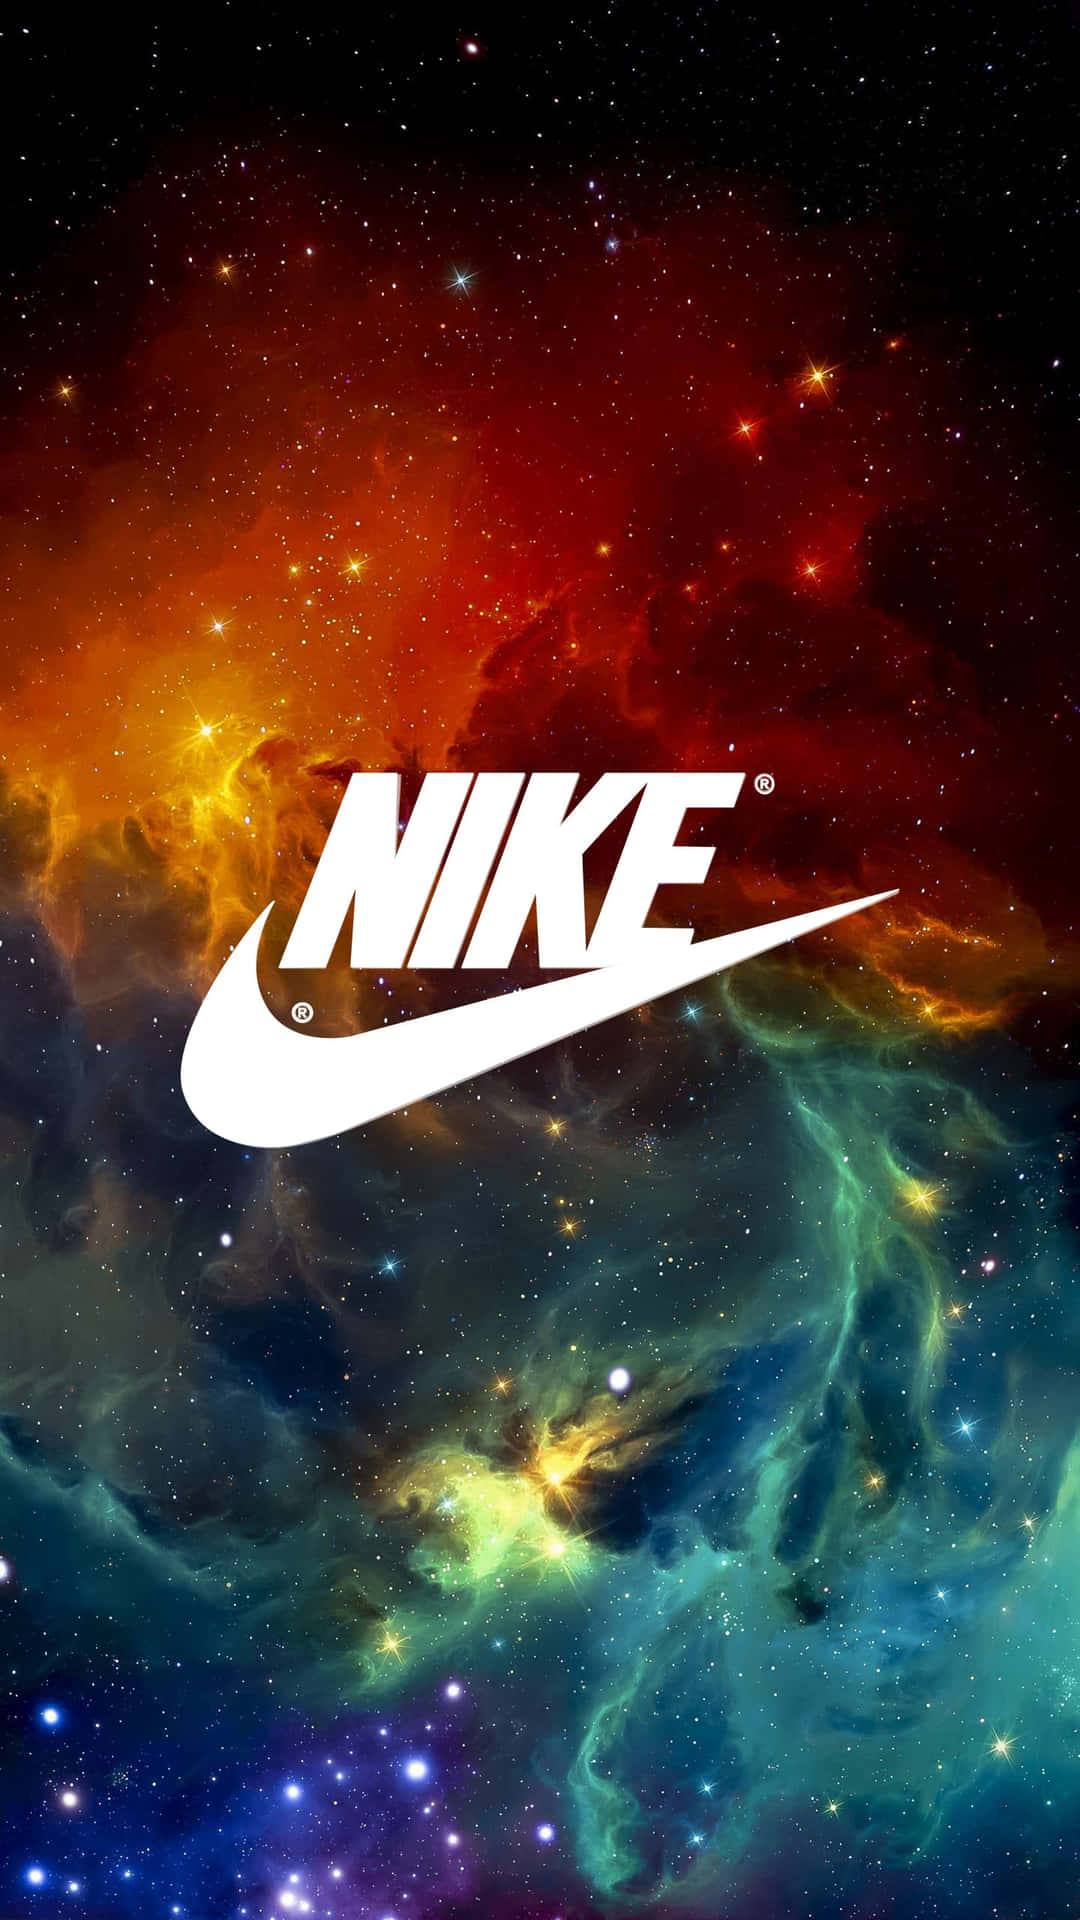 [100+] Nike Galaxy Wallpapers | Wallpapers.com